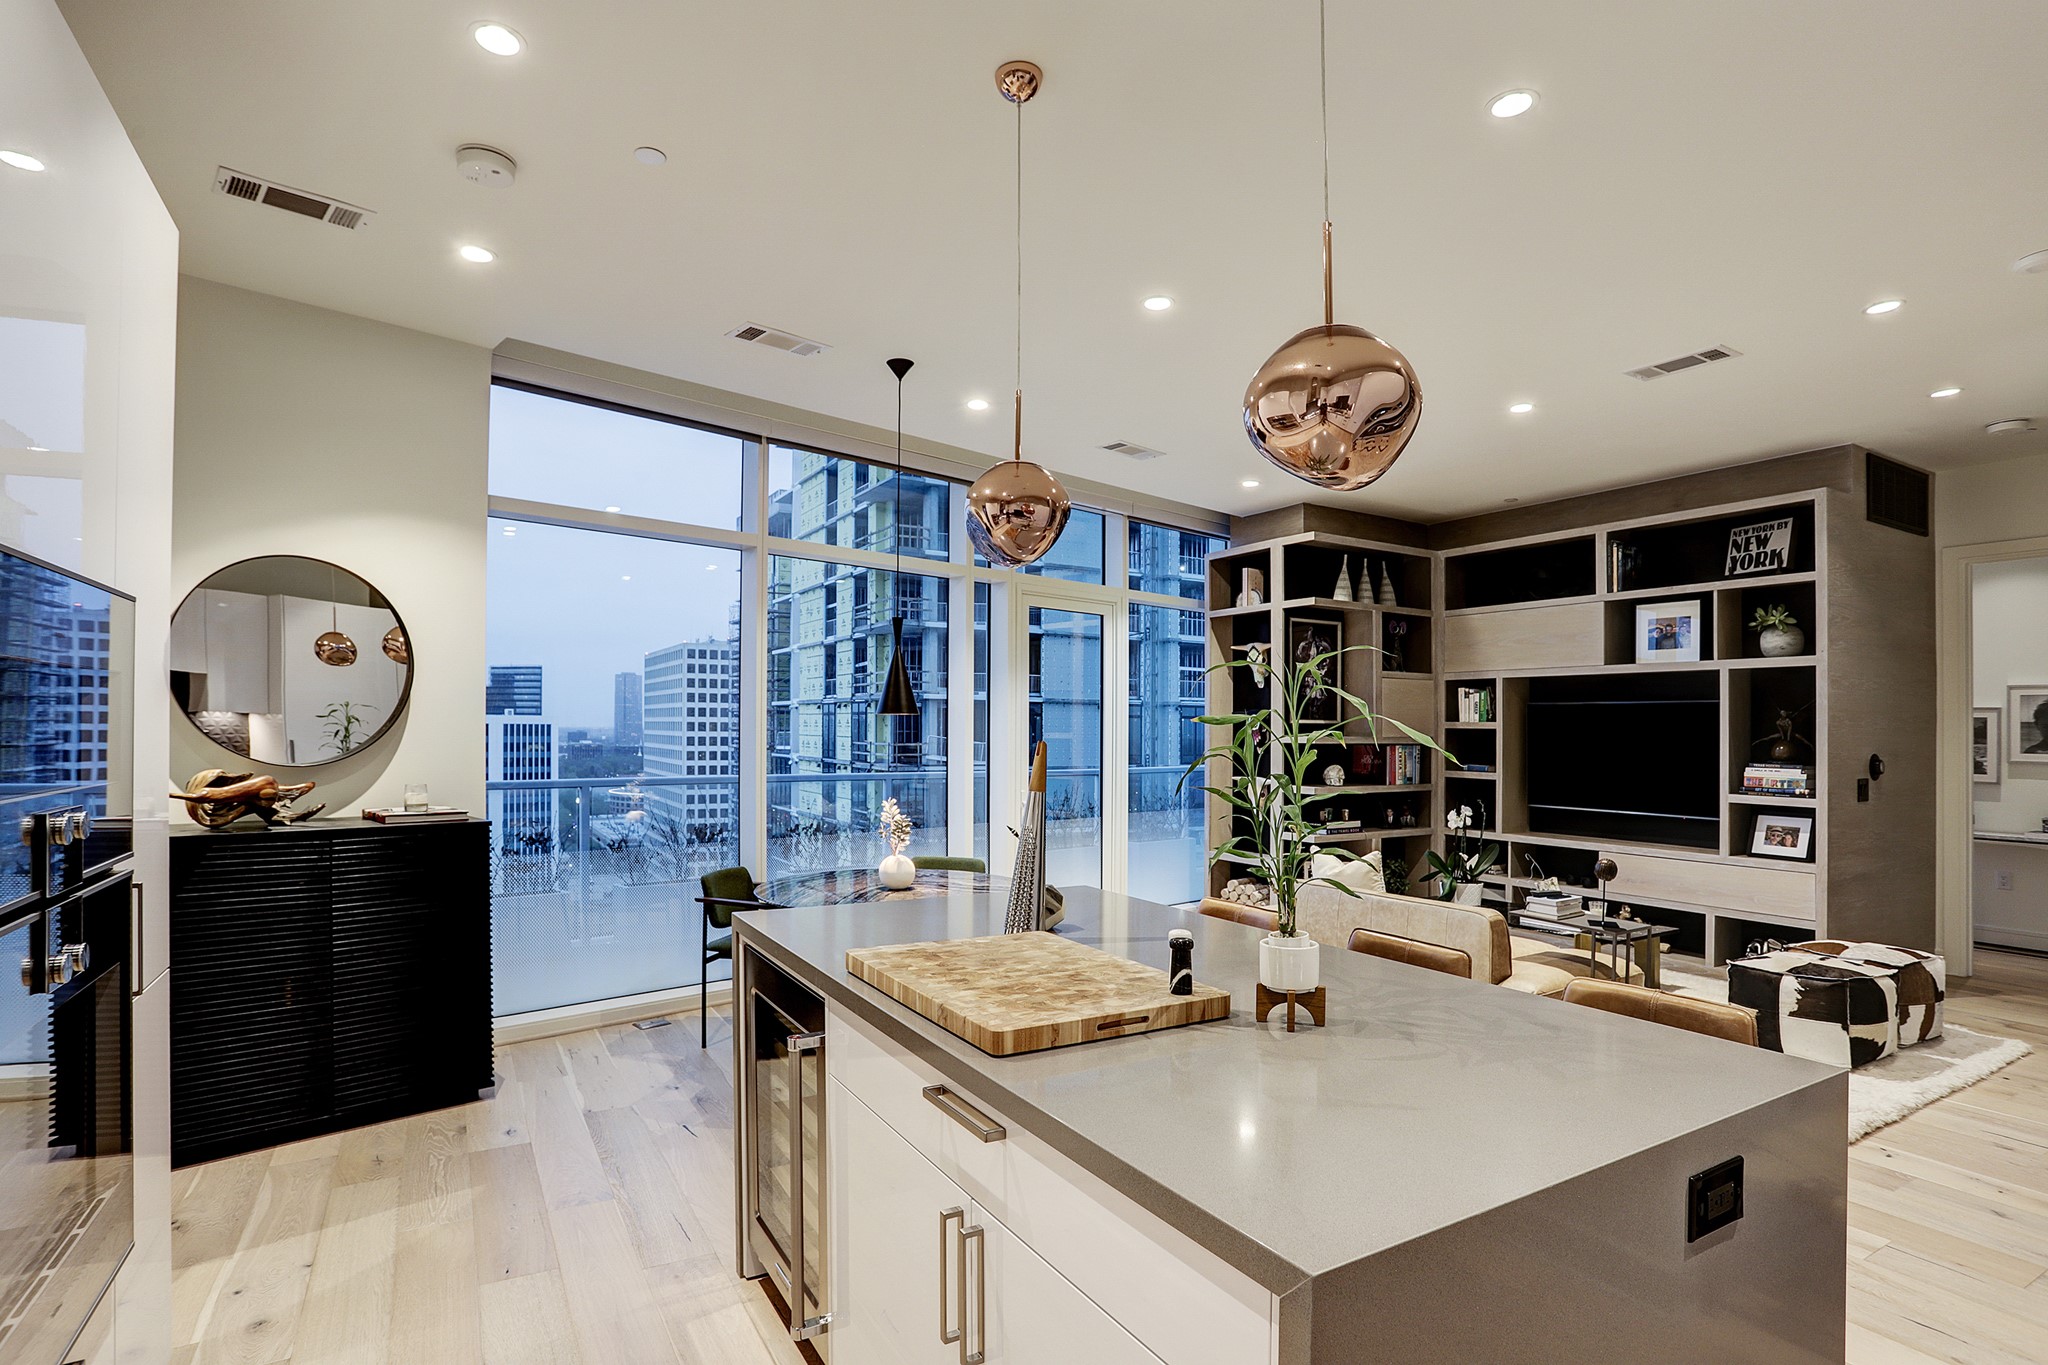 The CHEF'S ISLAND KITCHEN has stainless Gaggenau appliances and elegant Eggersmann cabinetry.  Notice the beverage chiller at the end of the island, the copper pendant lights above and the bronze cabinet hardware.